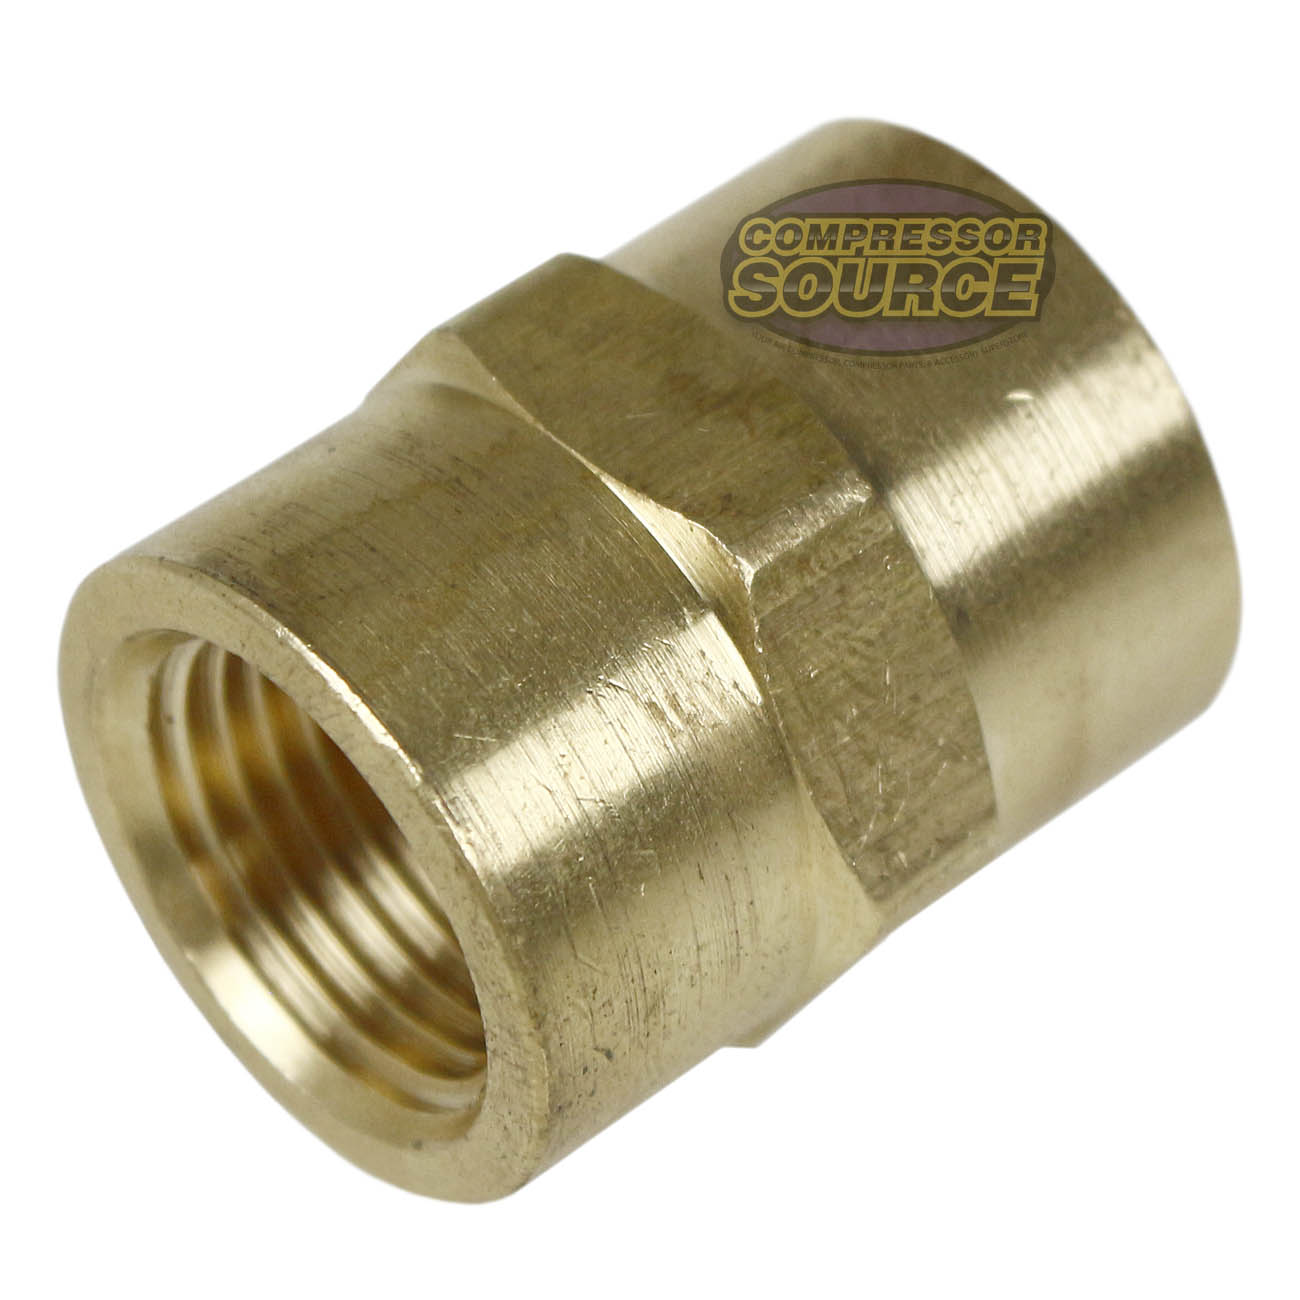 3/8" NPTF Thread Size Solid Brass Coupling Pipe Fitting 1200 PSI Maximum 103E